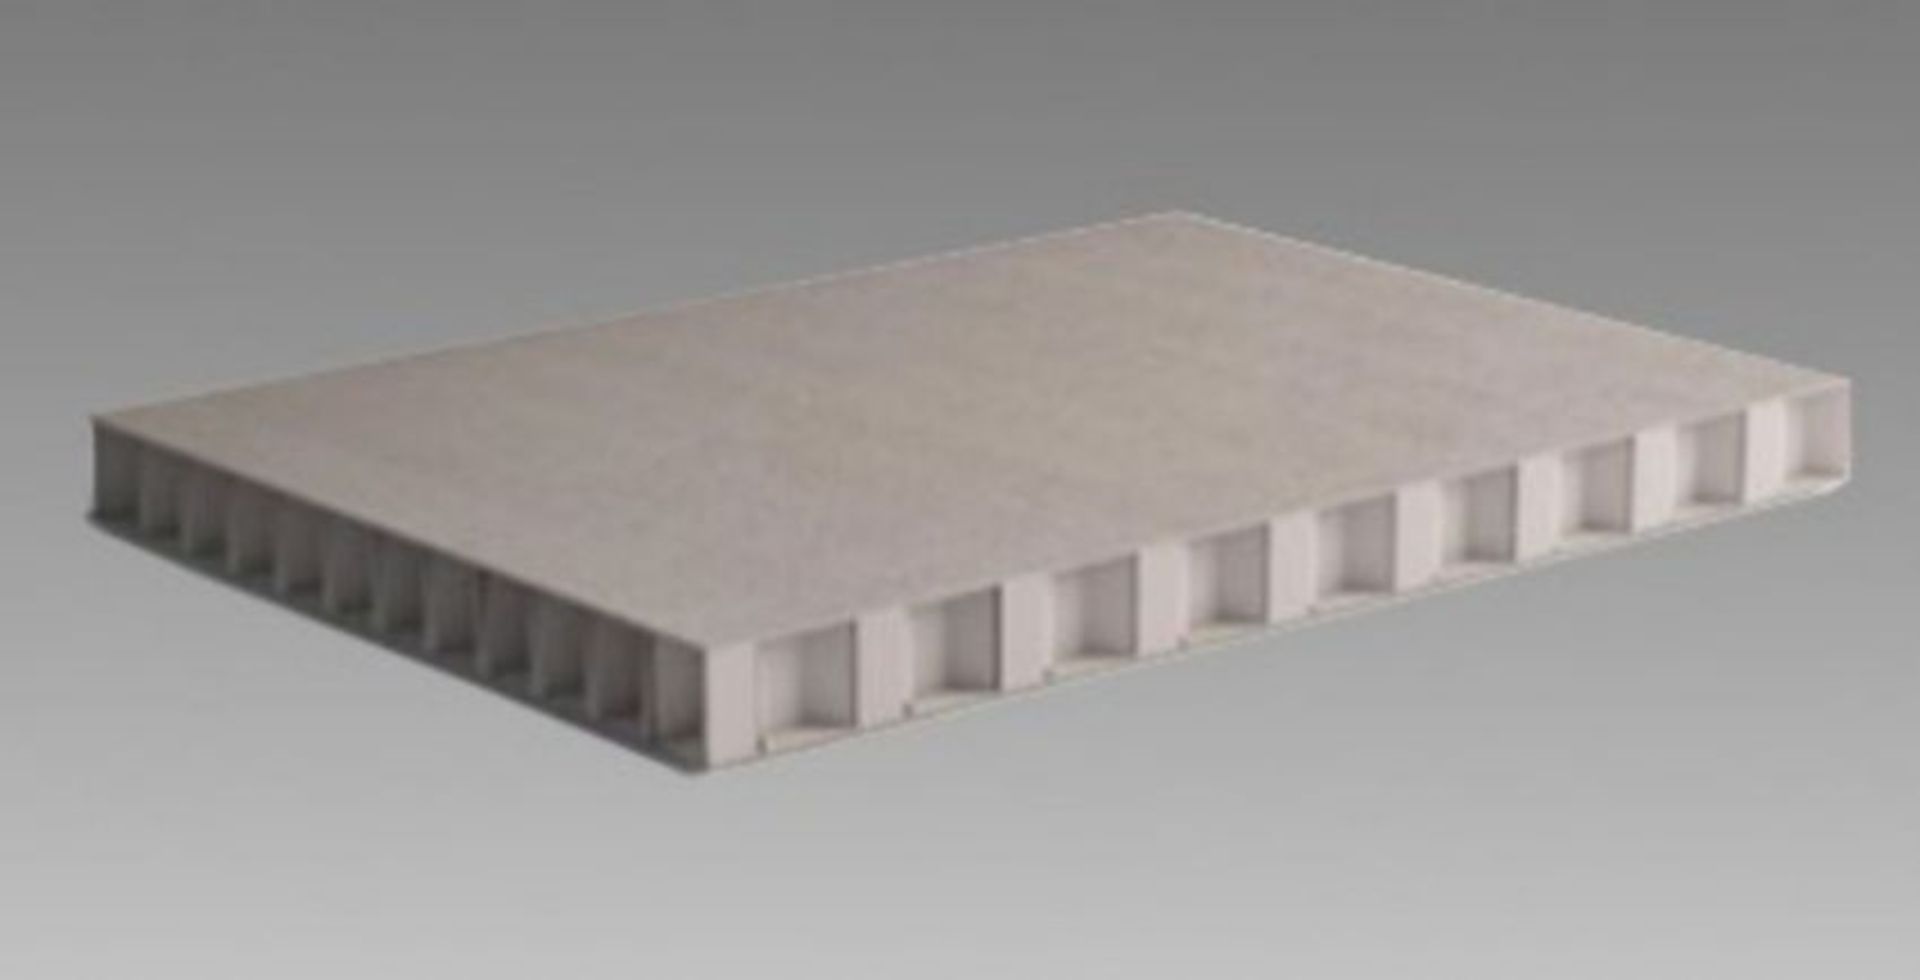 100 x ThermHex Thermoplastic Honeycomb Core Panels - Size: Approx. 2630 x 1210 x 18mm - New - Image 5 of 5